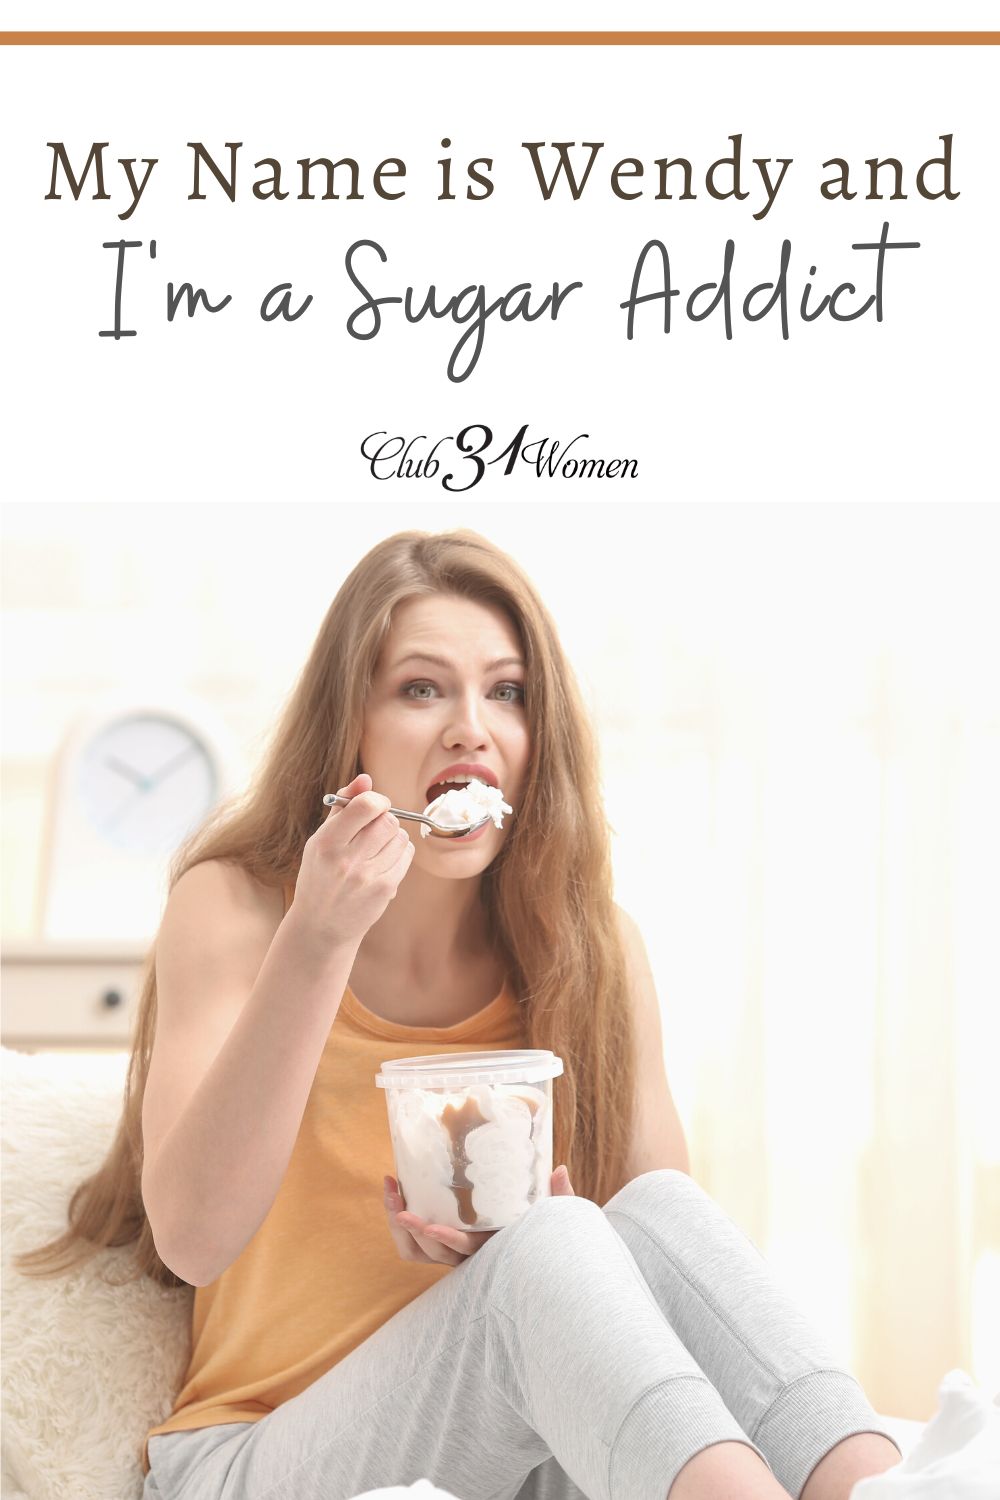 Are you a binge eater? An emotional eater? Are you a sugar addict? Draw close to the One who can satisfy your craving more deeply. via @Club31Women